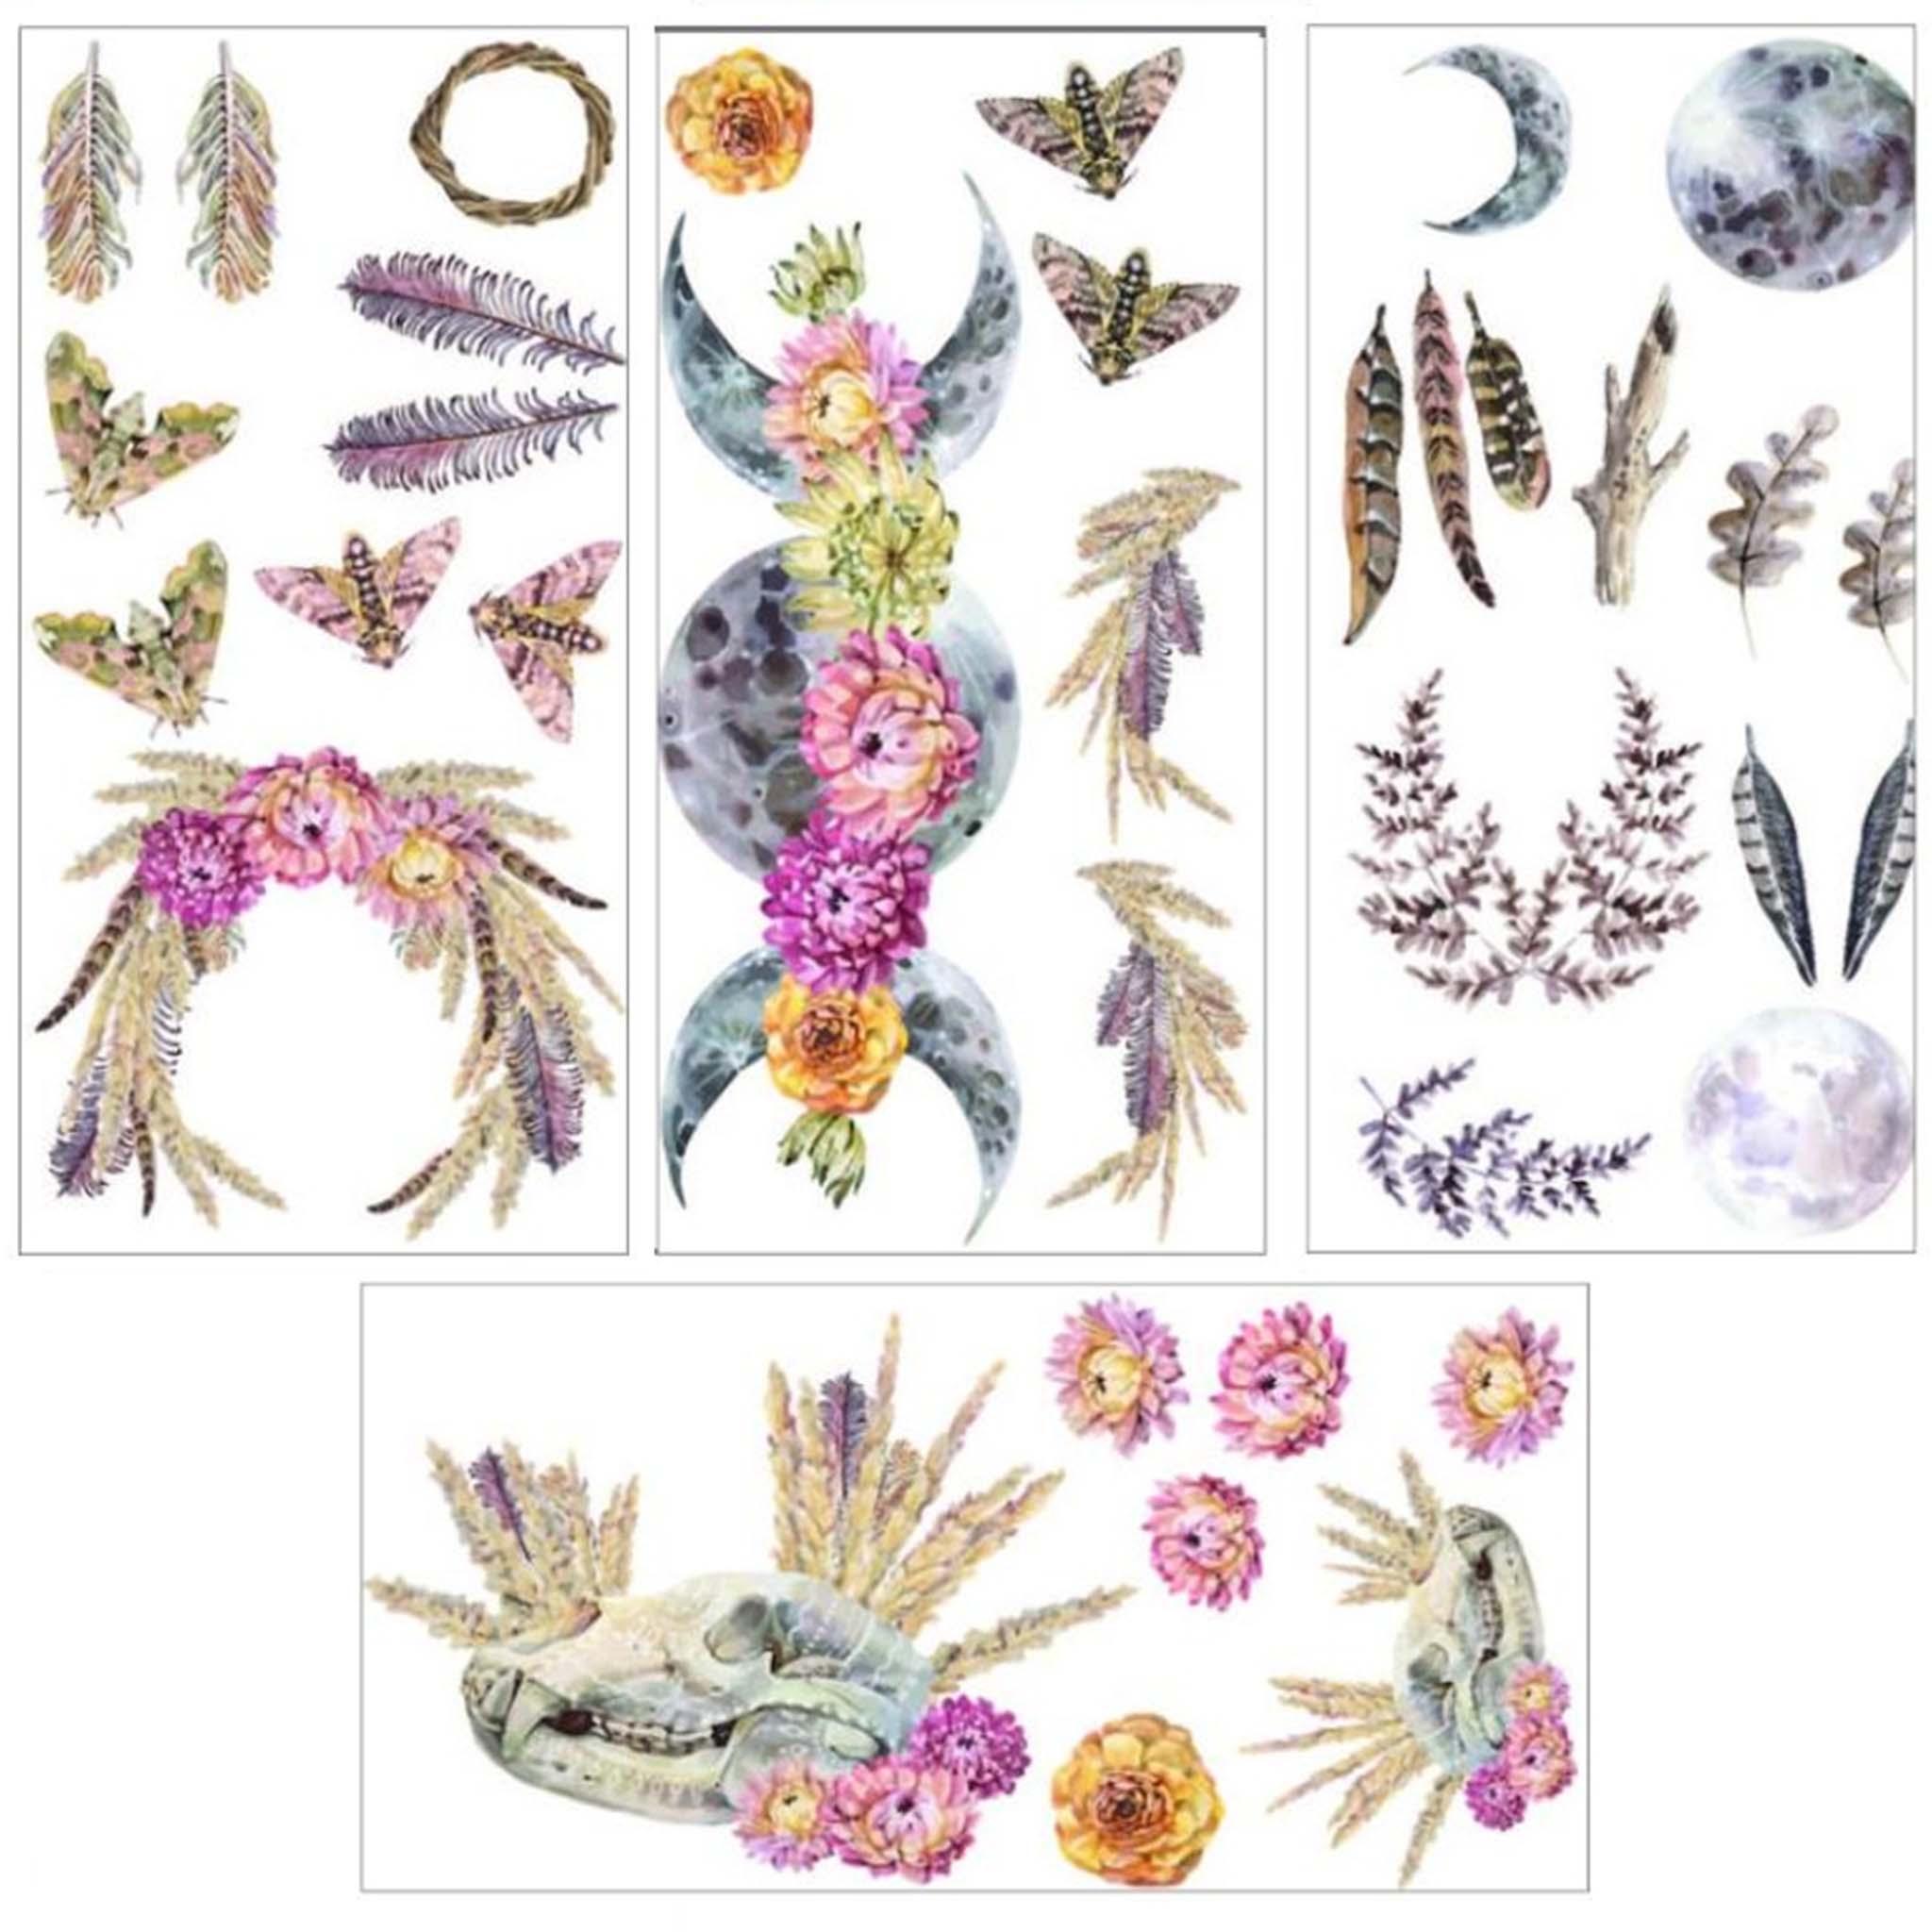 Four sheets of small rub-on transfers that feature featuring flowers, feathers, moons, and more are against a white background.